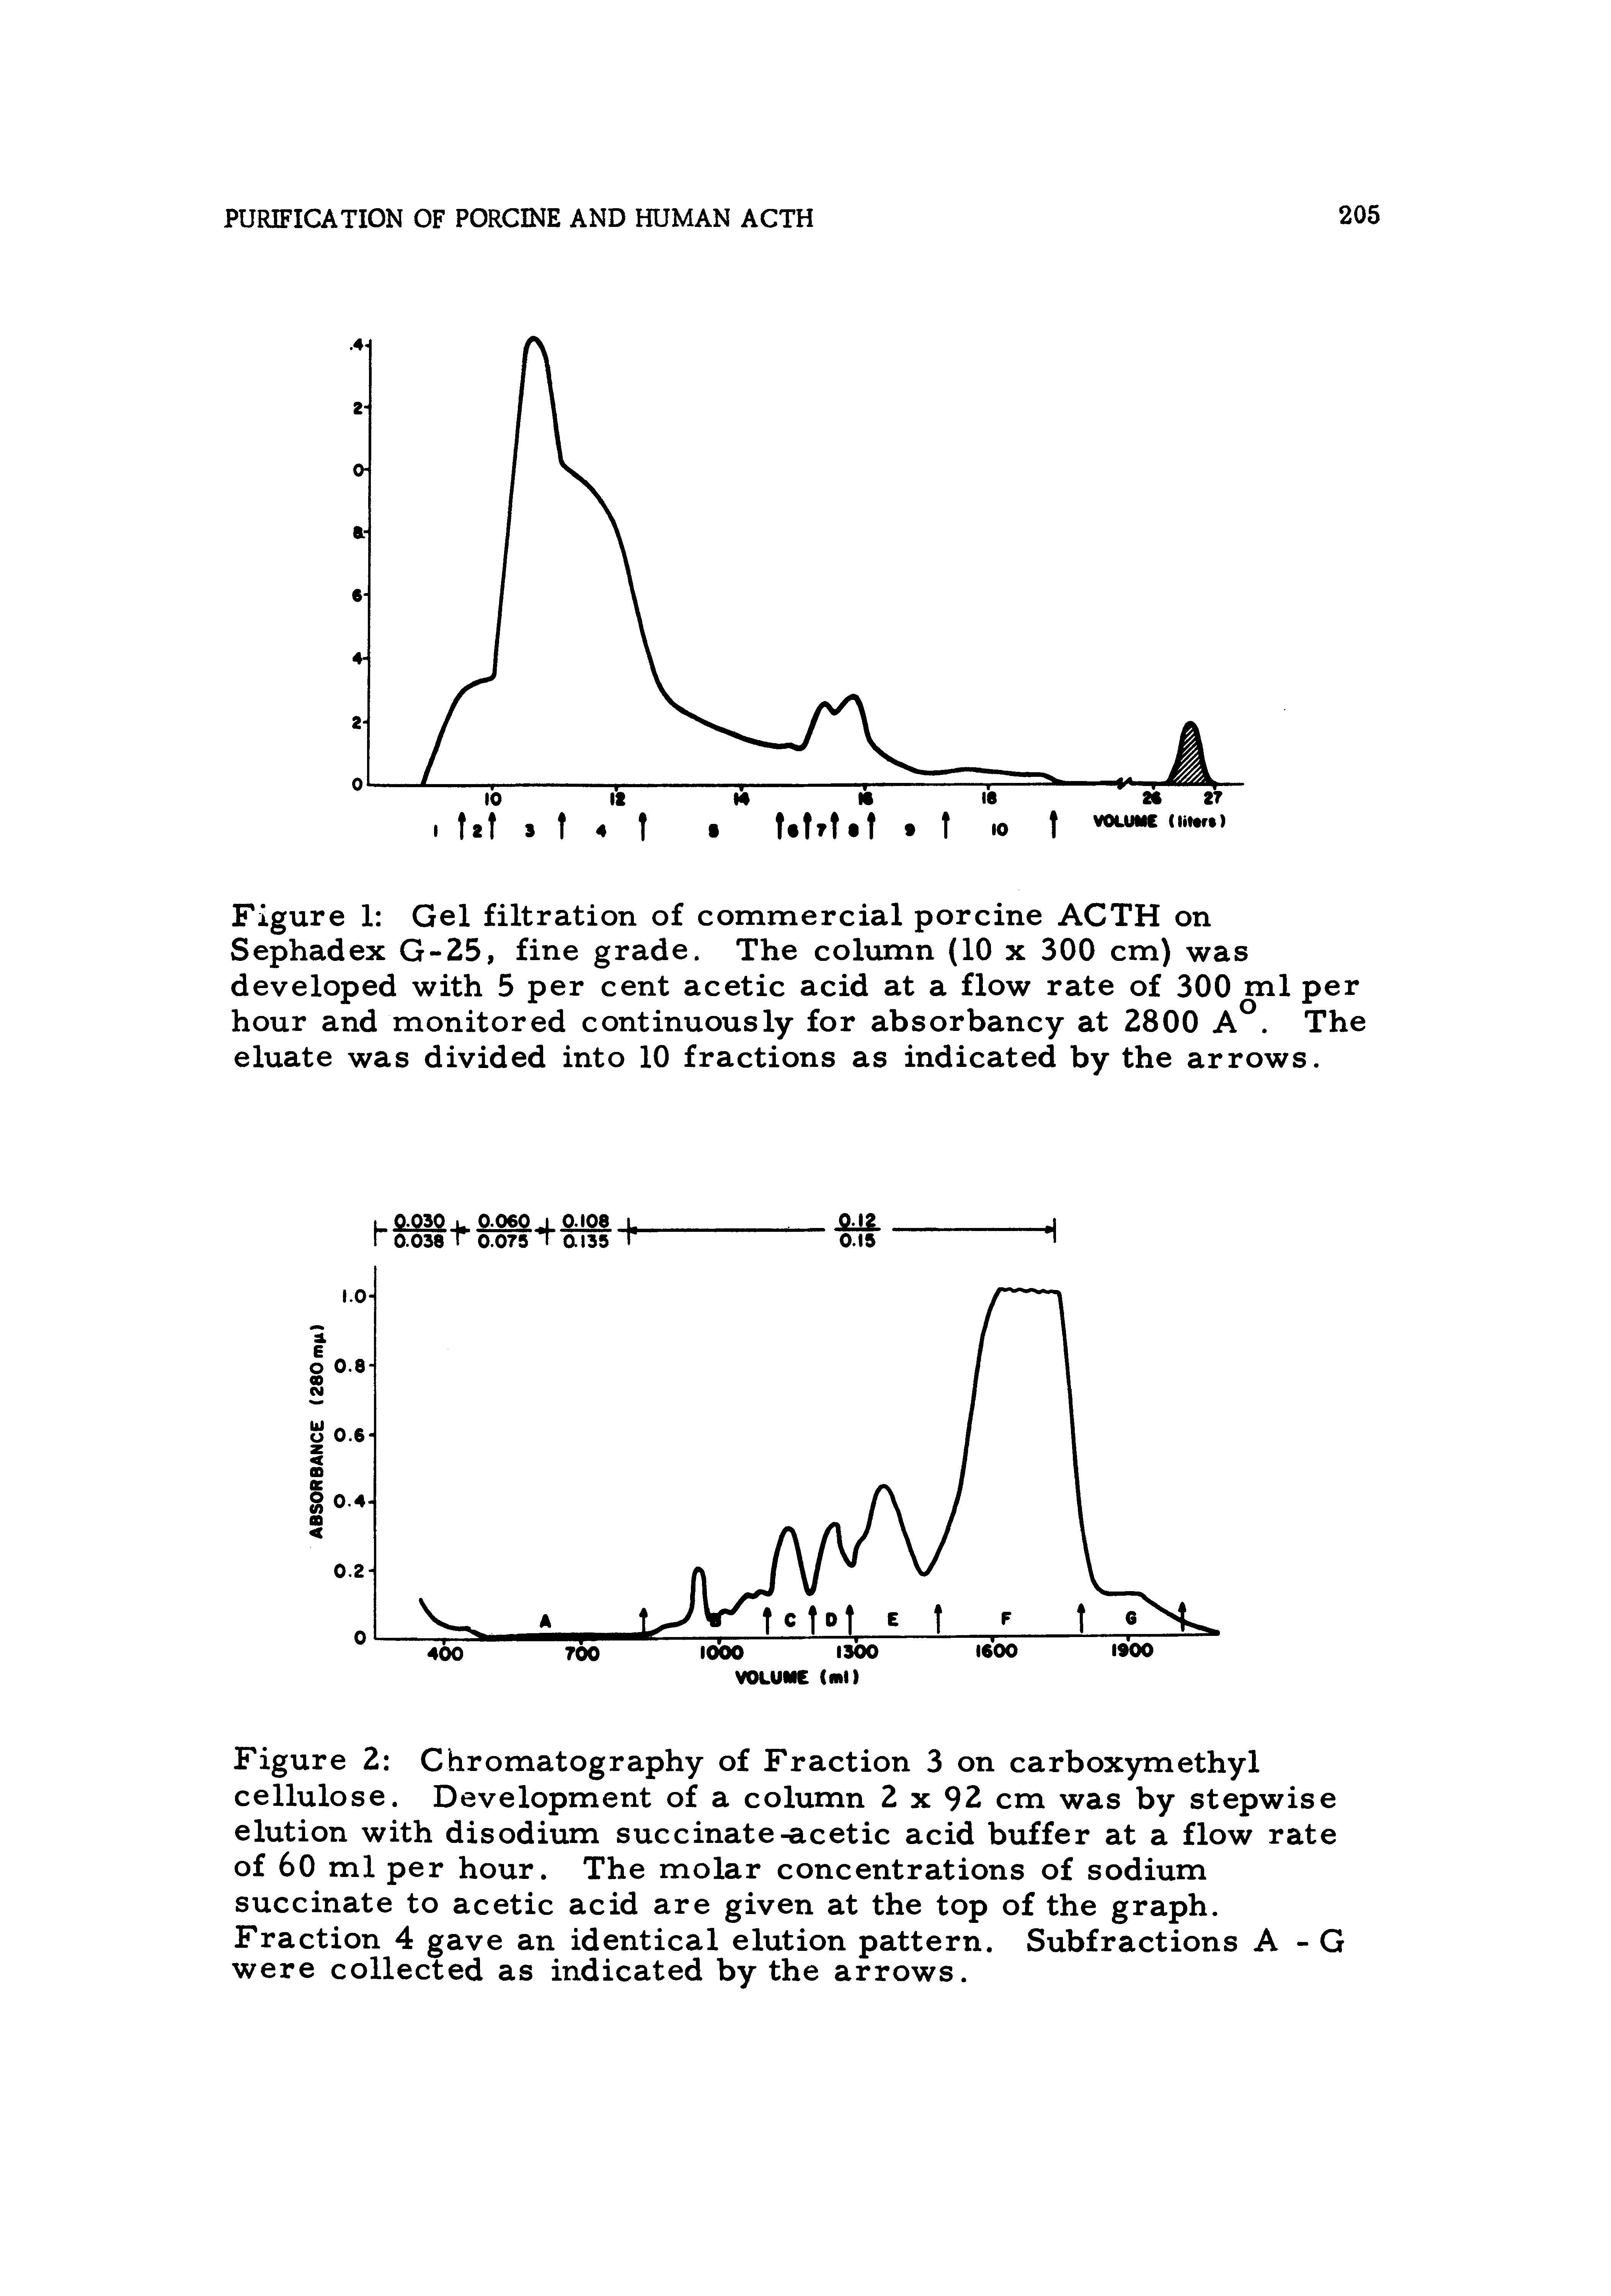 Figure 2 Chromatography of Fraction 3 on carboxymethyl cellulose. Development of a column 2 x 92 cm was by stepwise elution with disodium succinate-acetic acid buffer at a flow rate of 60 ml per hour. The molar concentrations of sodium succinate to acetic acid are given at the top of the graph. Fraction 4 gave an identical elution pattern. Subfractions A - G were collected as indicated by the arrows.